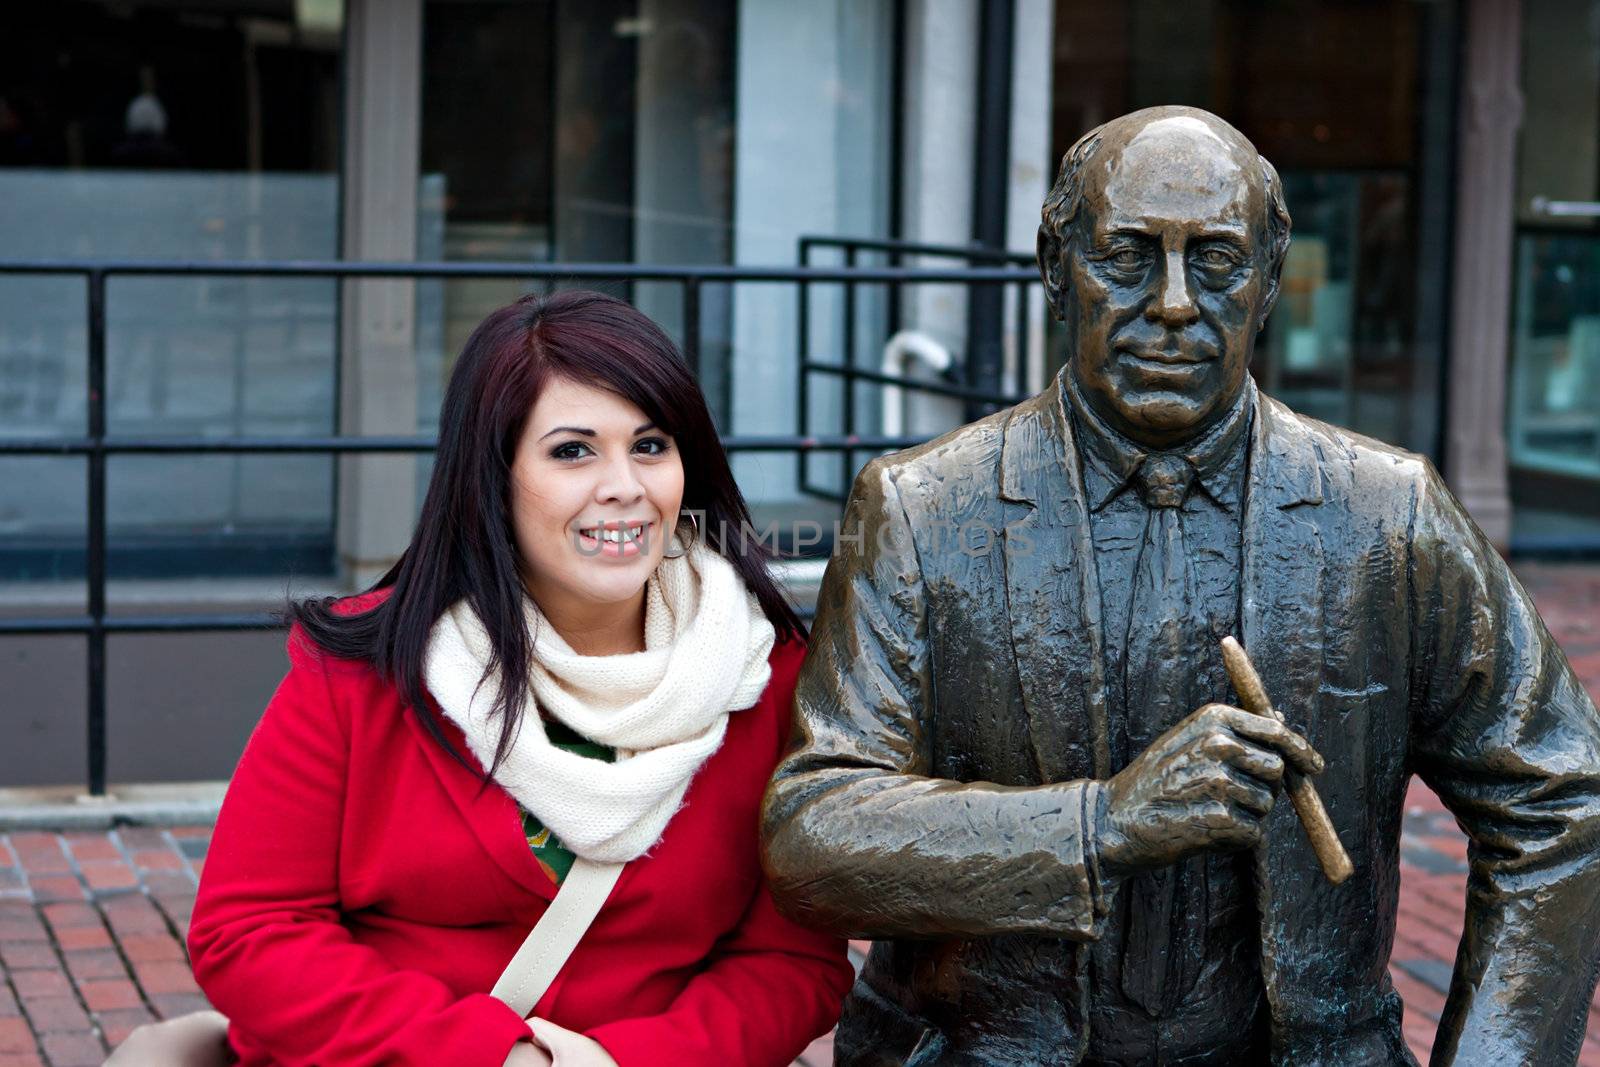 Young woman puts her arm around the public Red Auerbach statue found in Bostons Quincy Market just outside of Faneuil Hall.